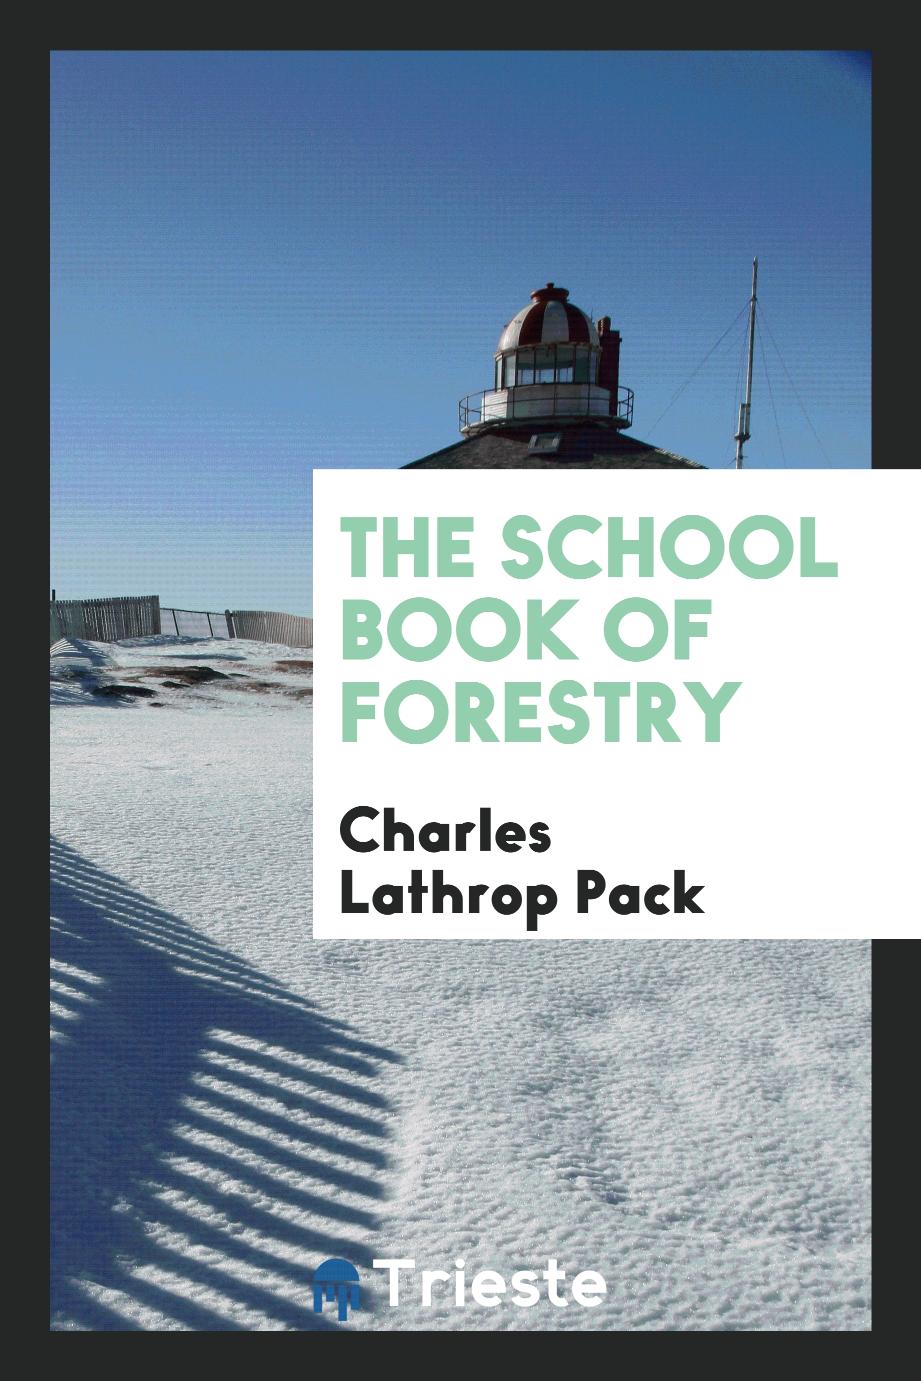 The School book of forestry